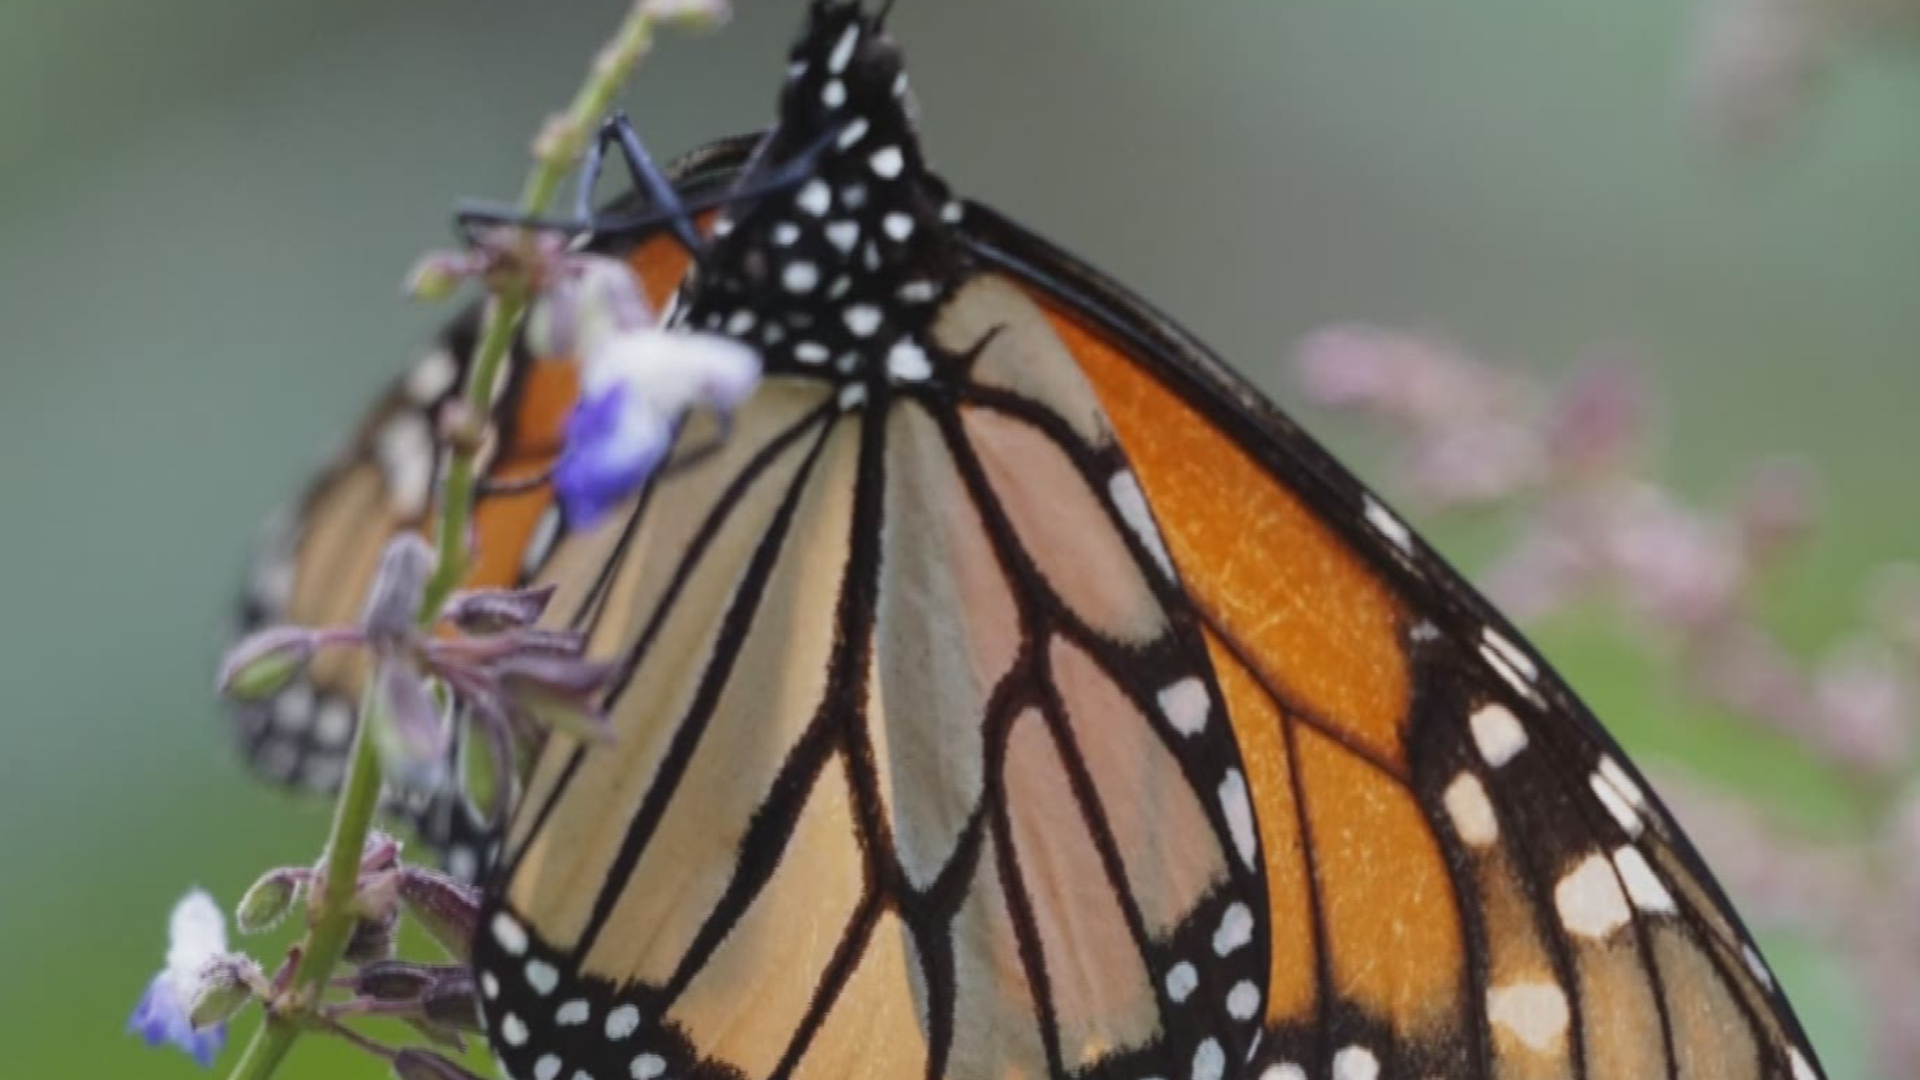 It's called the Monarch Monitoring Blitz. Citizen scientists can help make valuable observations about the monarch butterfly population. Sven Explains how you can get involved.